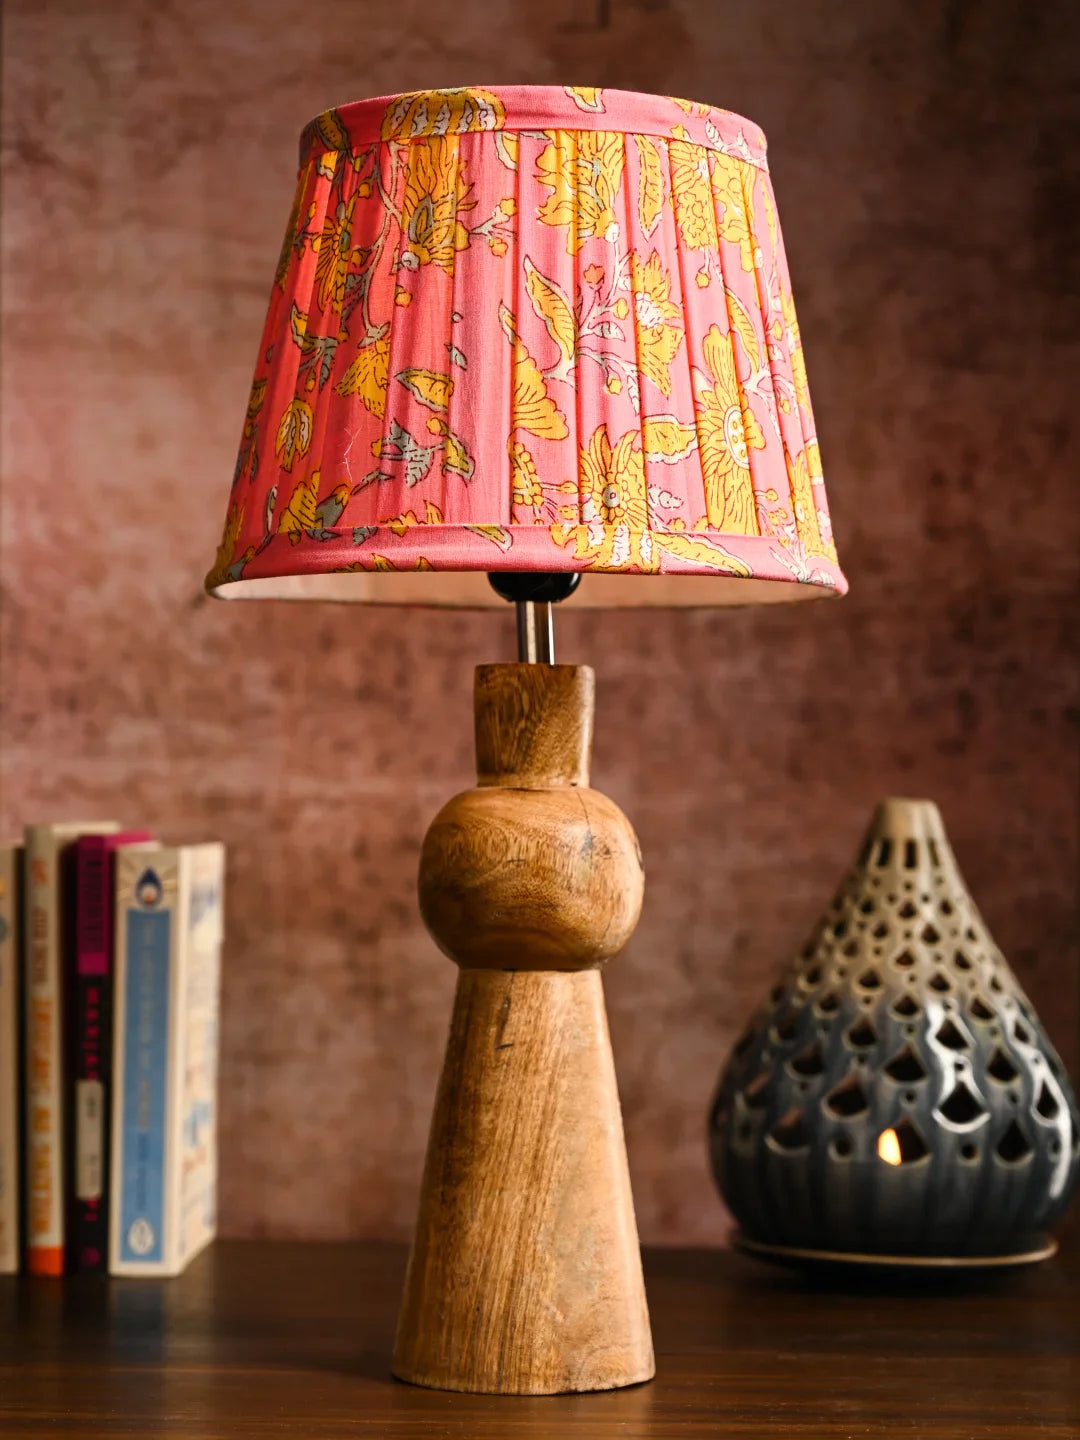 Wooden Skirt Table Lamp with Pleeted Colorful Pink Taper Shade